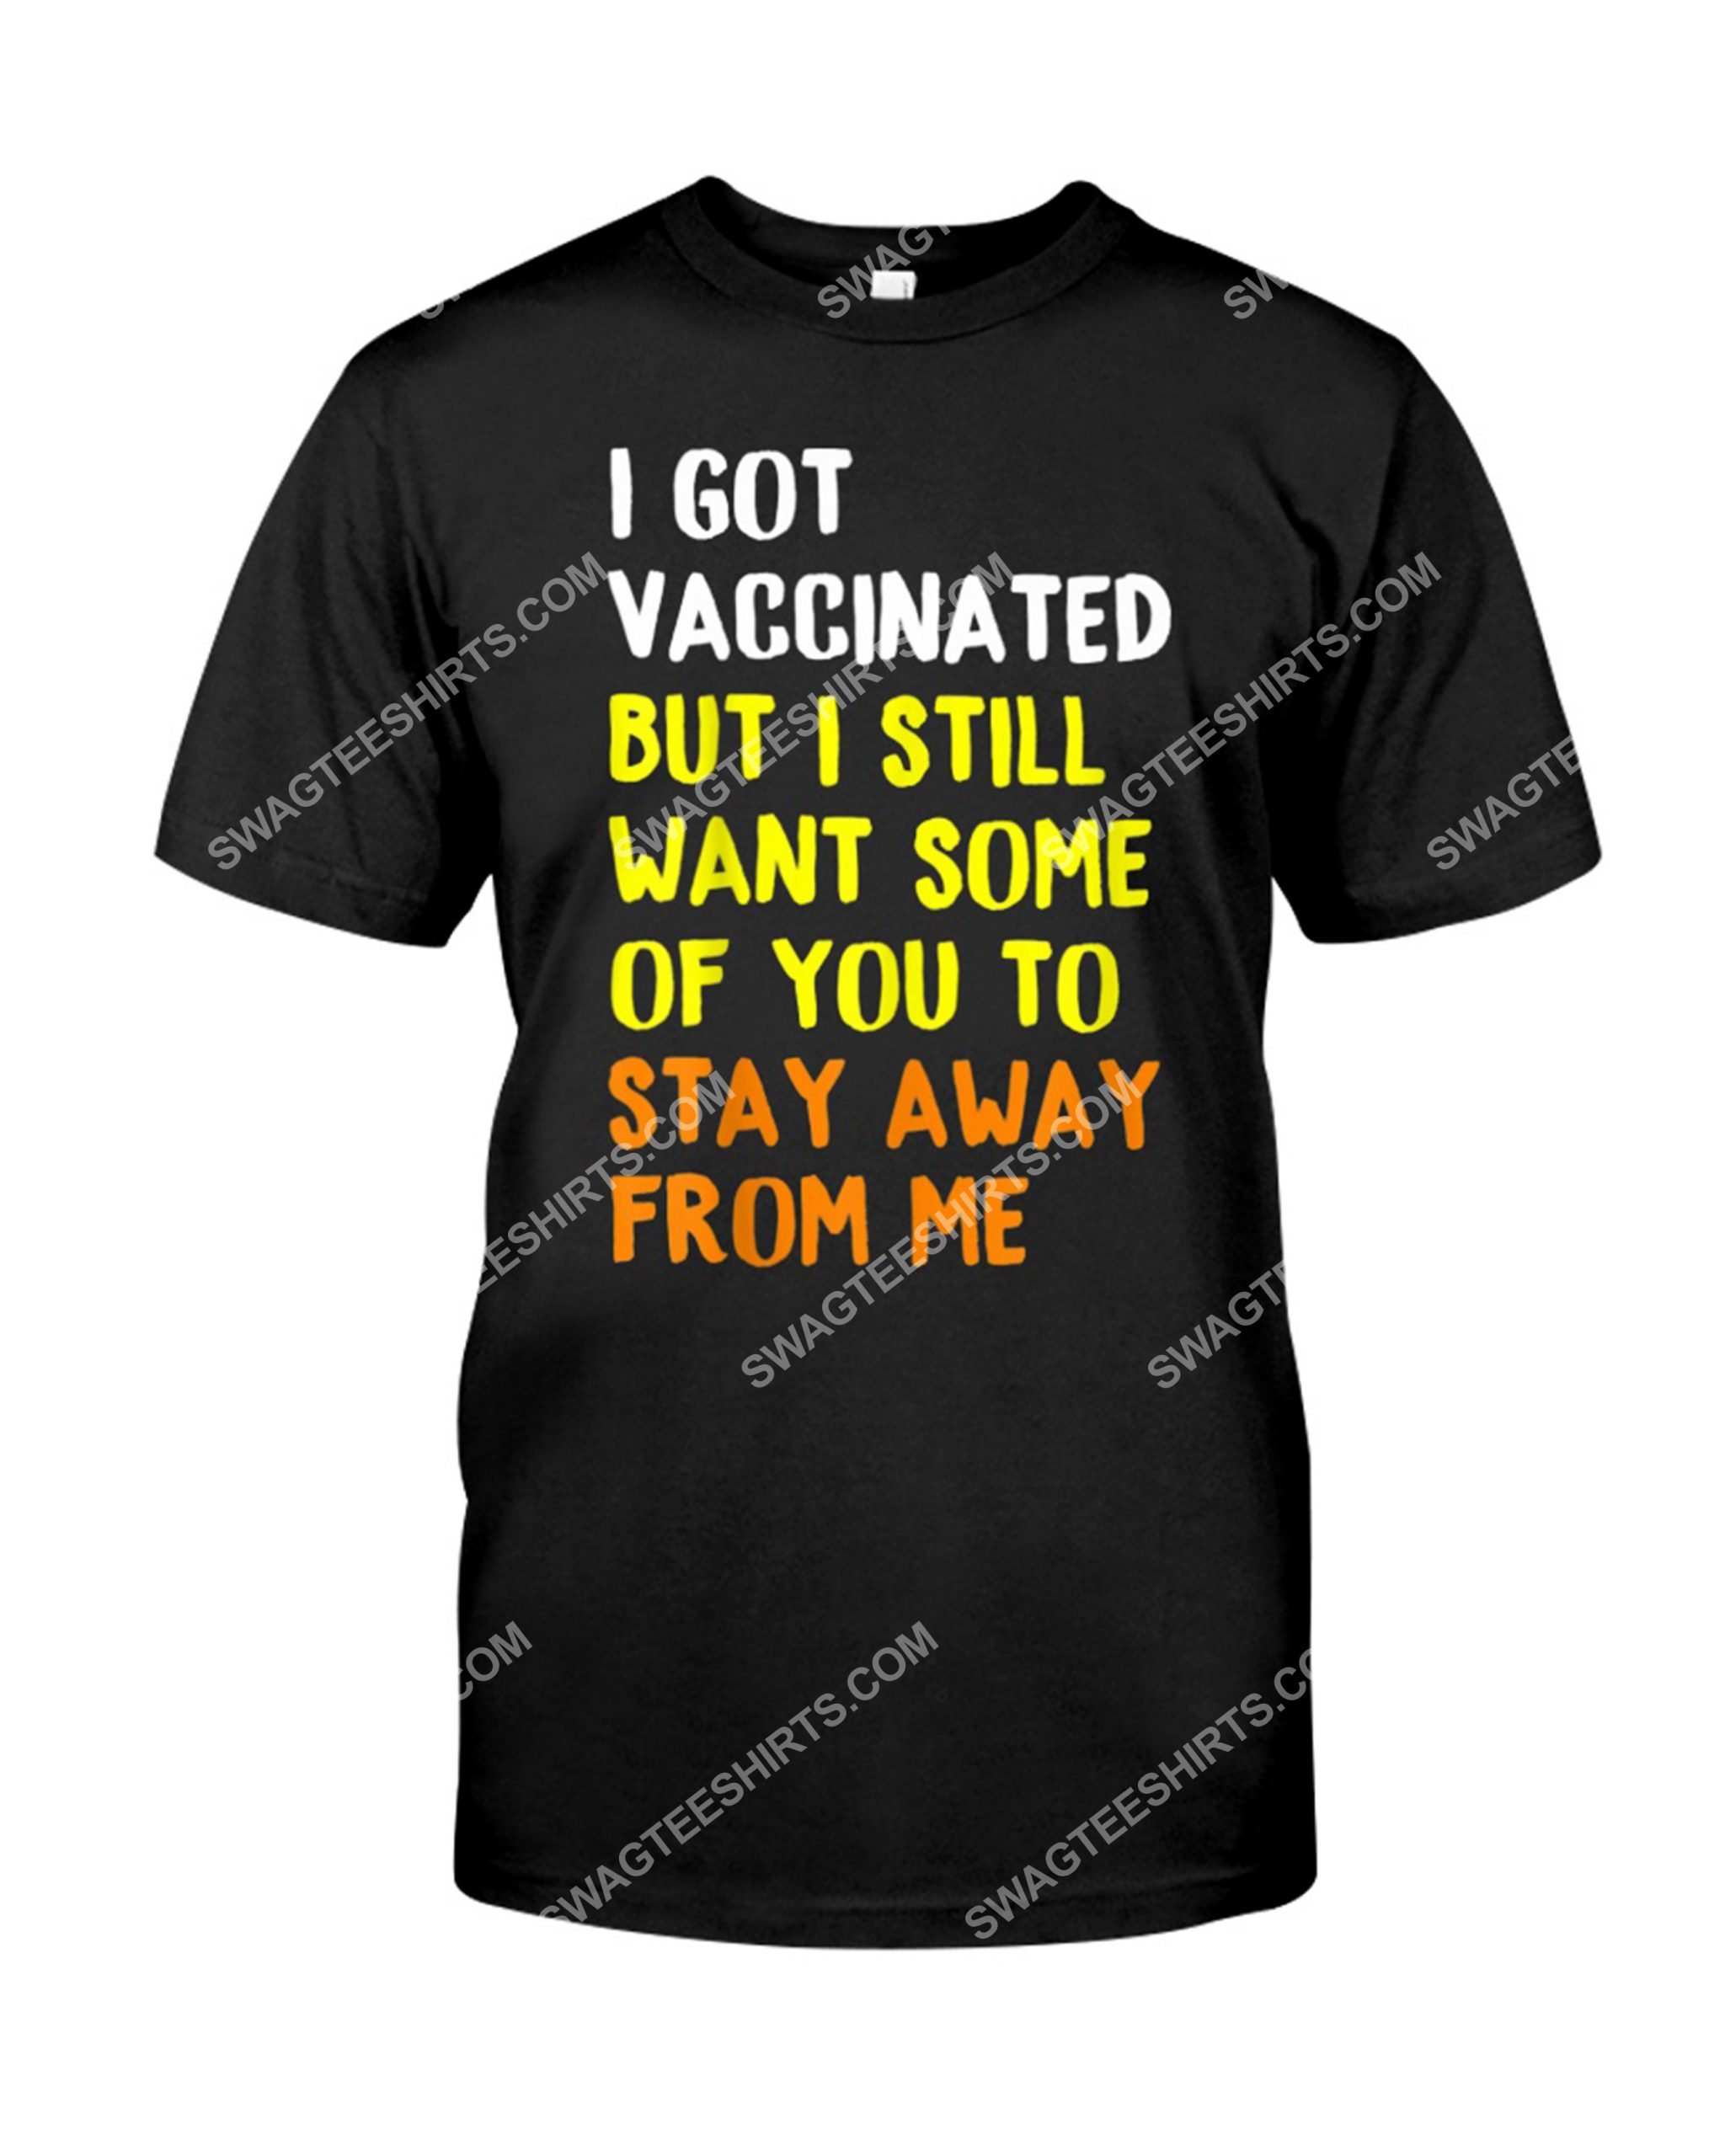 i got vaccinated but i still want some of you to stay away from me shirt 1(1)